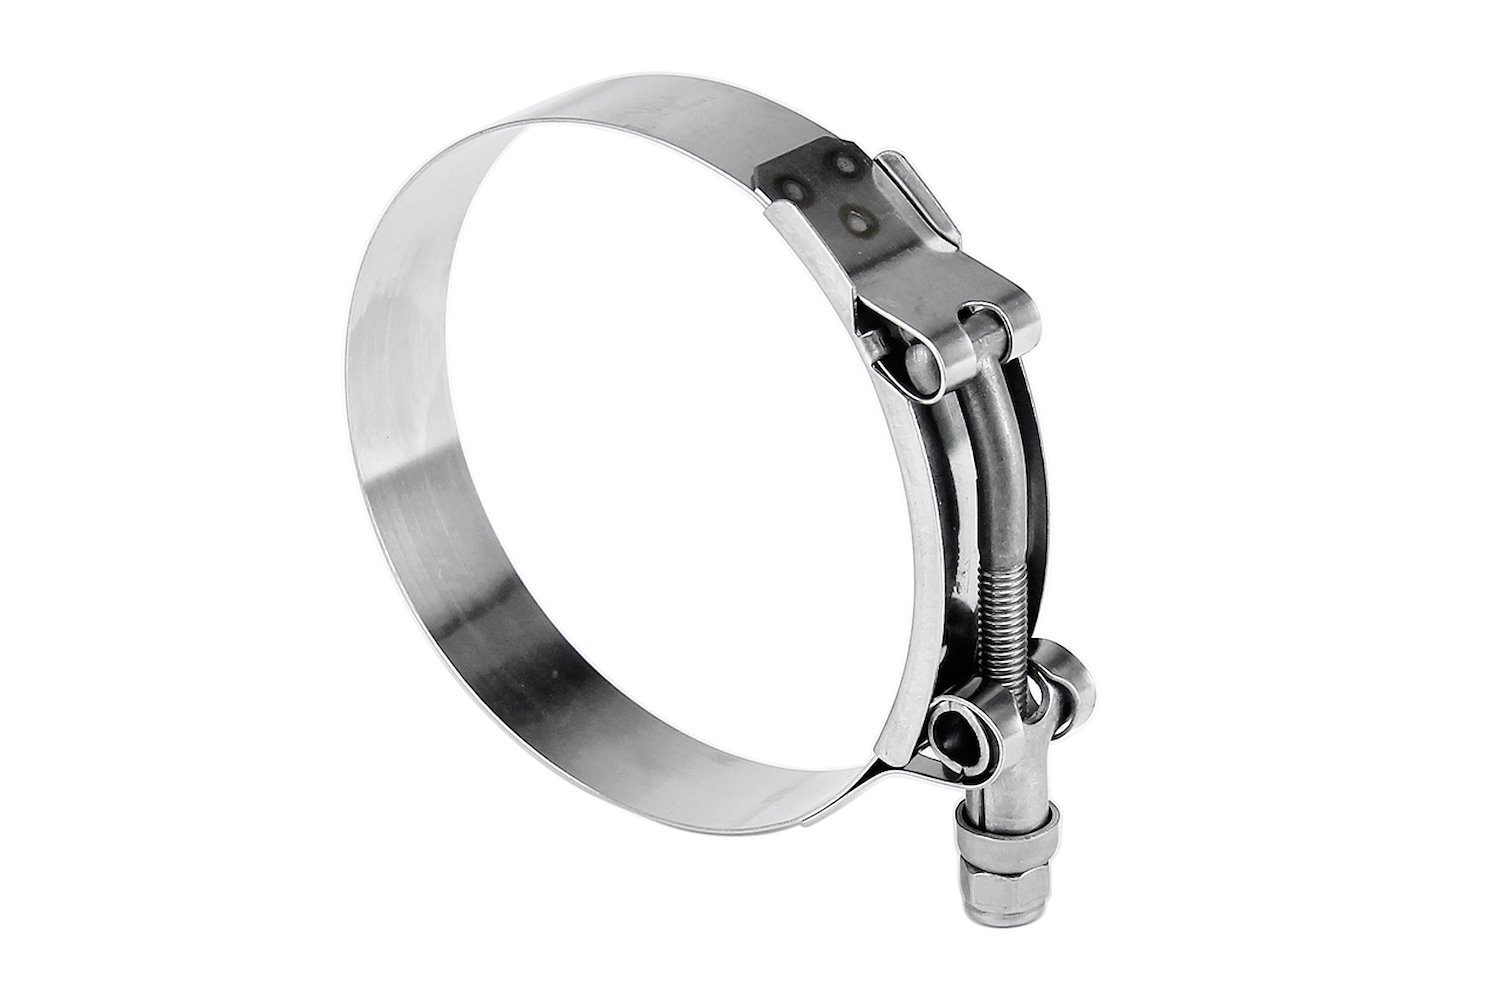 316-SSTC-210-218 100-Percent Marine Grade Stainless Steel T-Bolt Hose Clamp, Size #236, Range: 8.25 in.- 8.56 in.